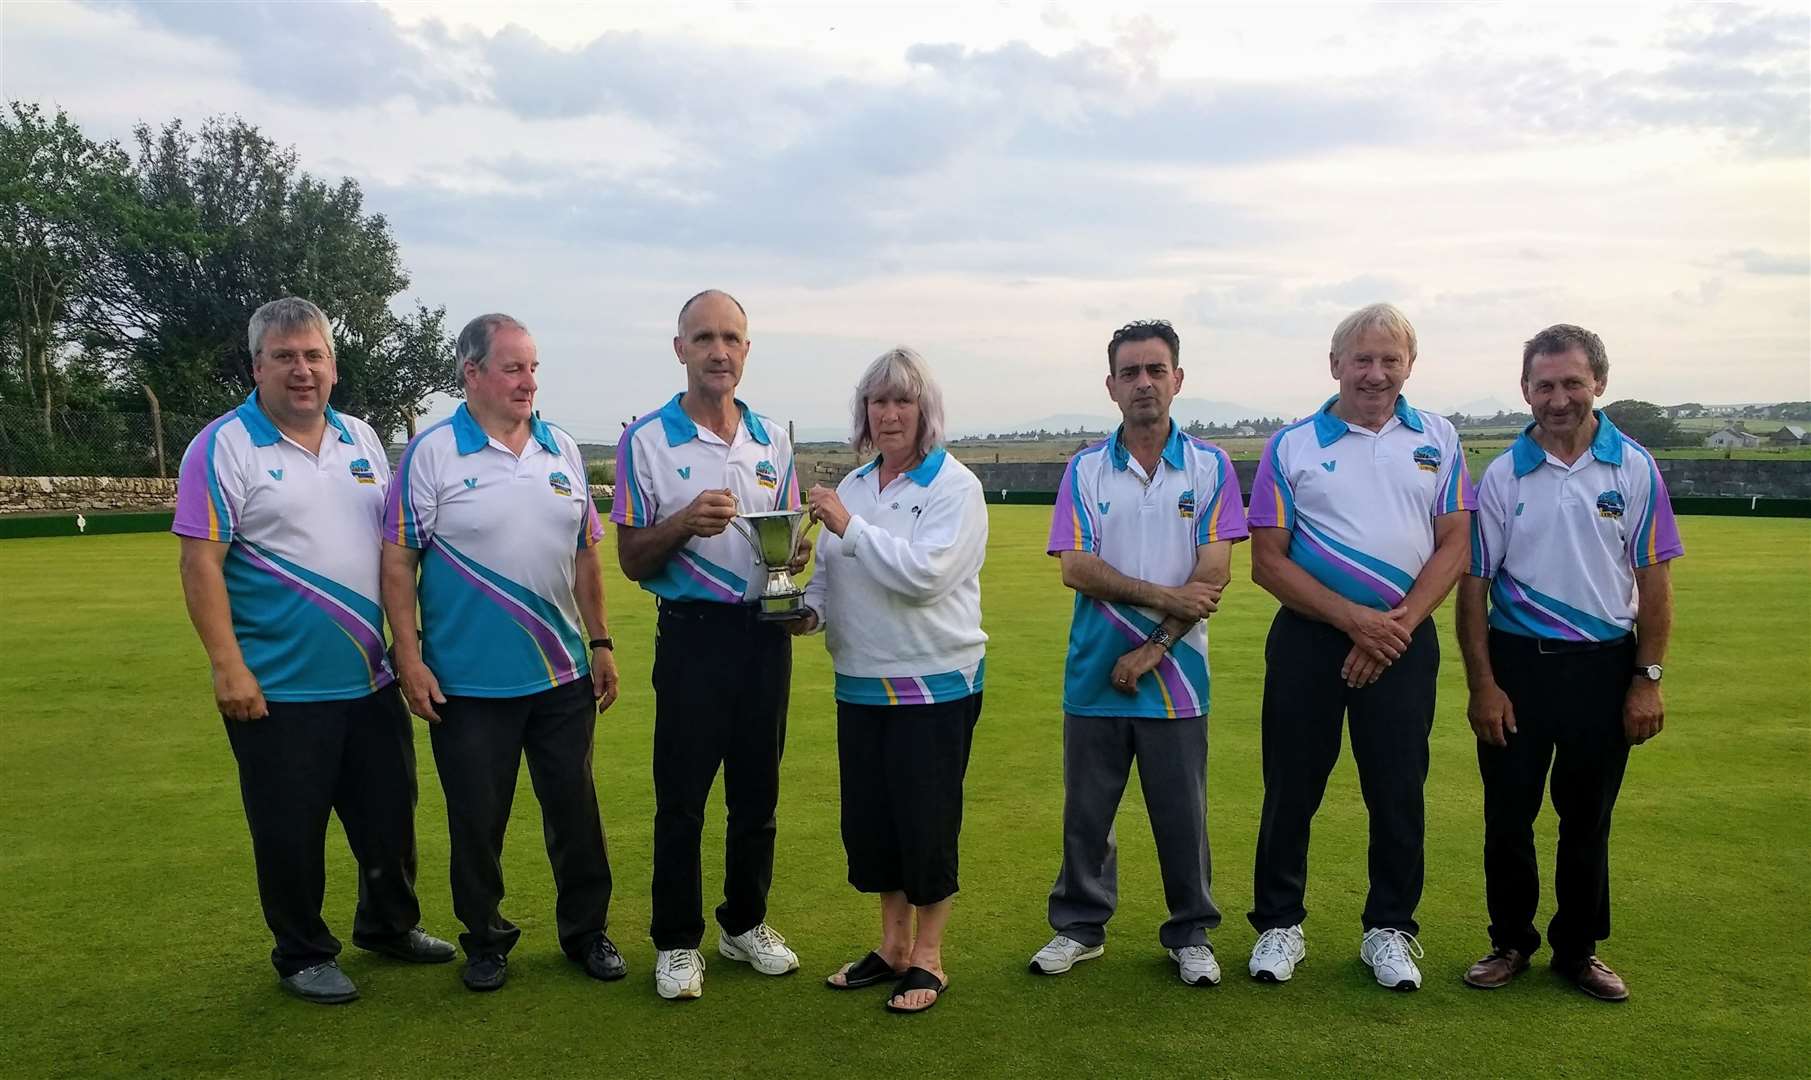 From left: The winning team of Sandy Mackay, Jim Fraser and John Grant with Lybster president Fran Manners presenting the trophy, along with runners-up George Zindilis, Douglas Sutherland and George Sutherland.